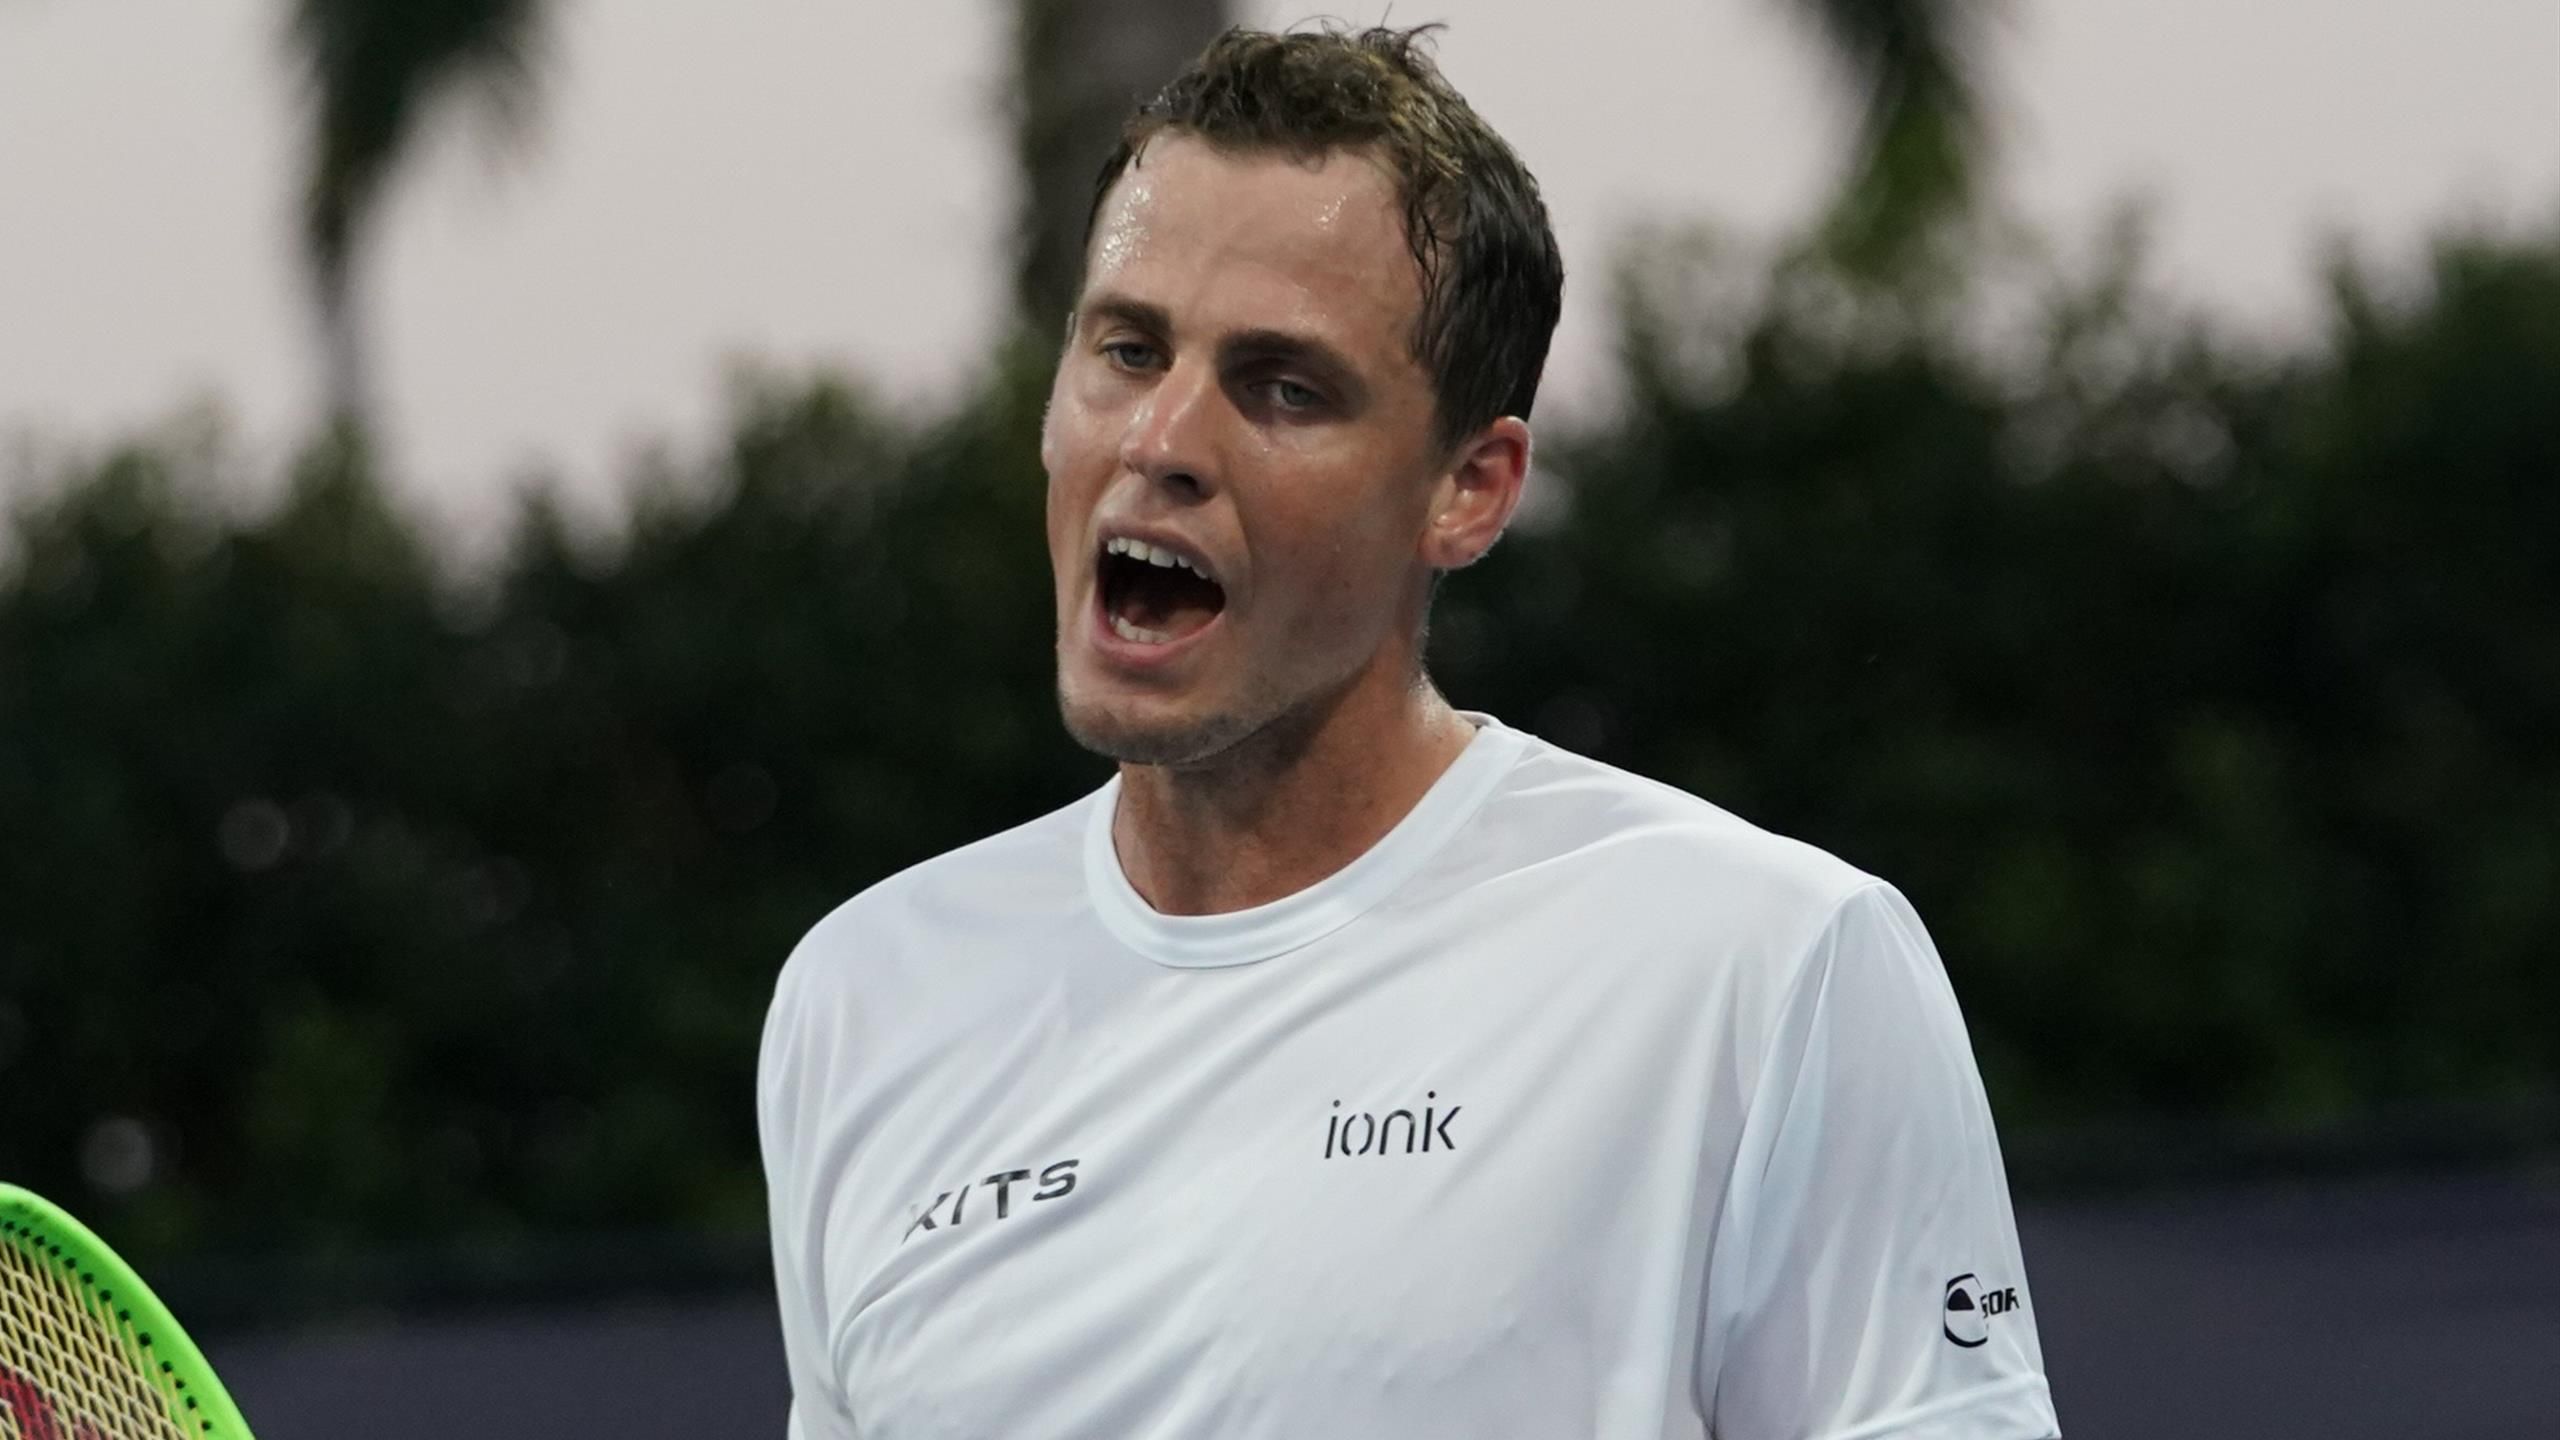 Screaming, threats and tears - Why Vasek Pospisil blew up at Miami Open after ATP meetings